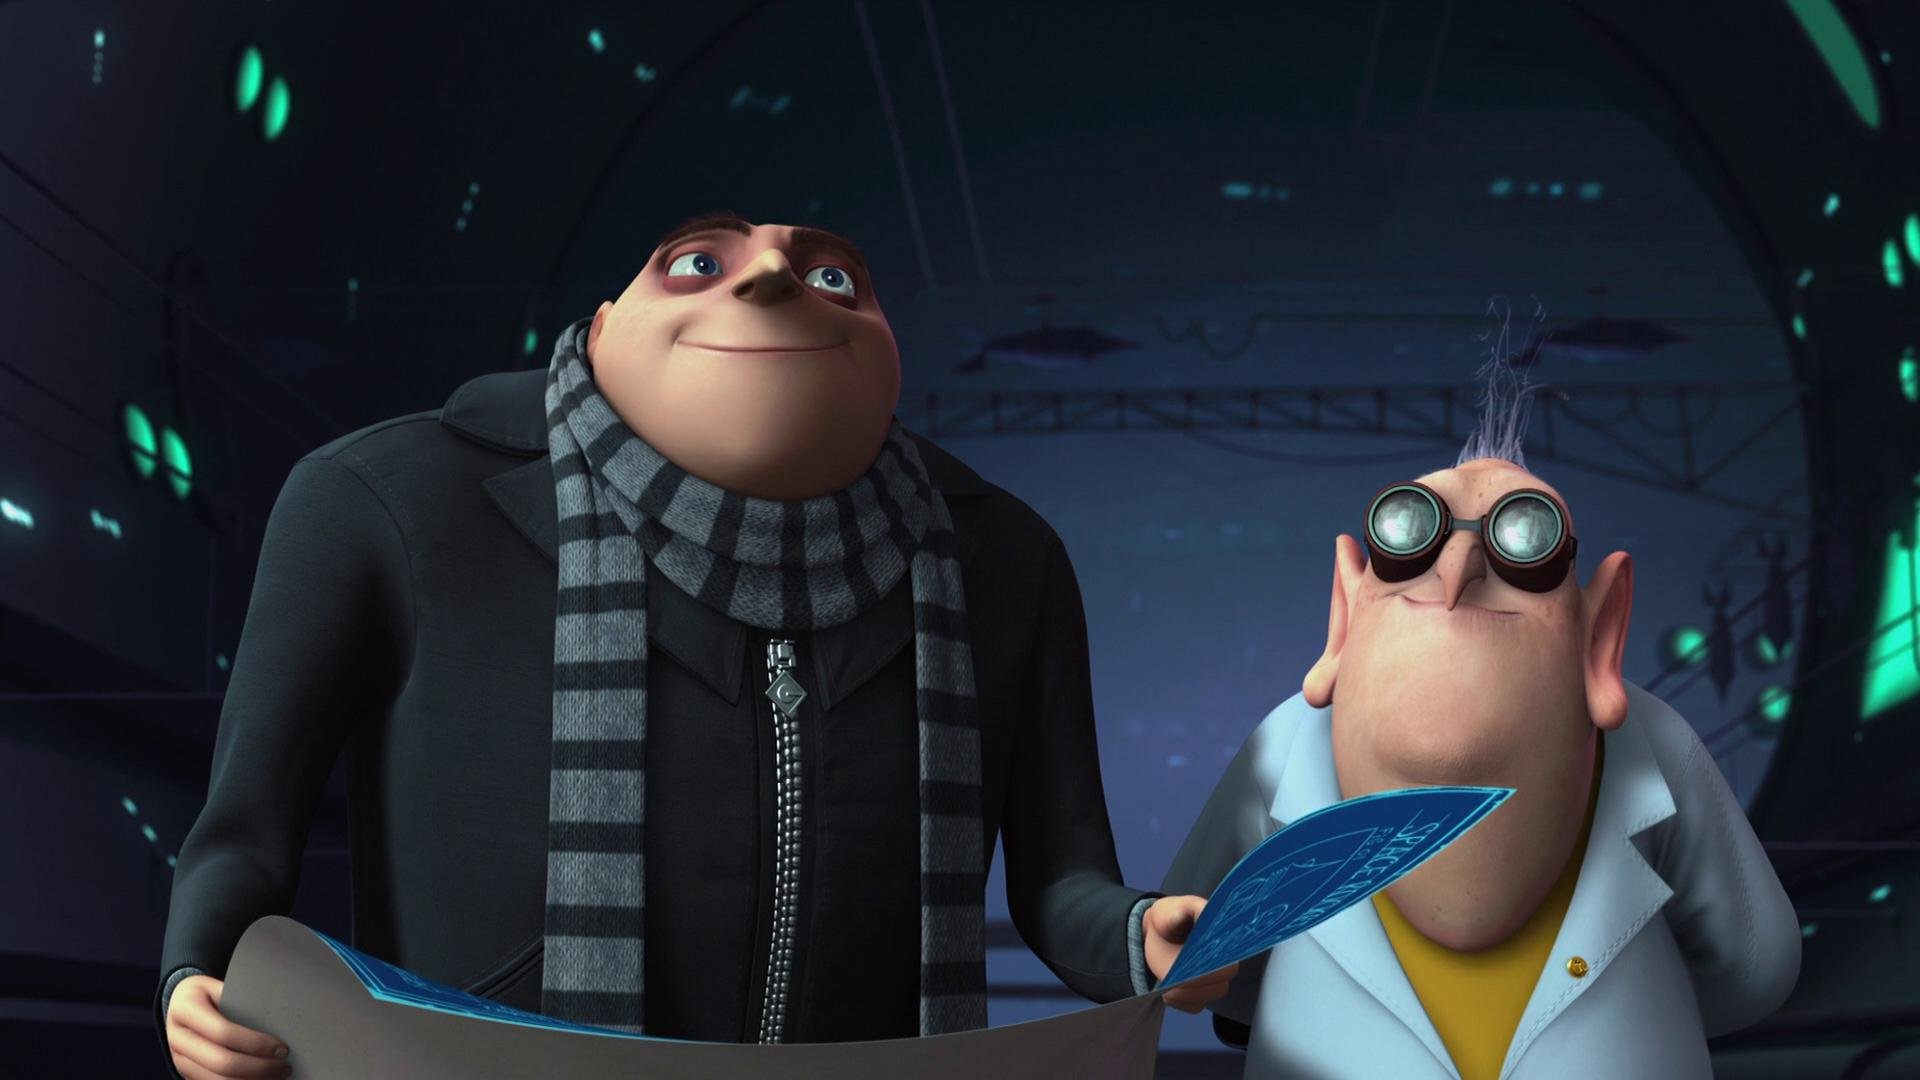 Best Despicable Me wallpaper ID:407930 for High Resolution hd 1080p computer